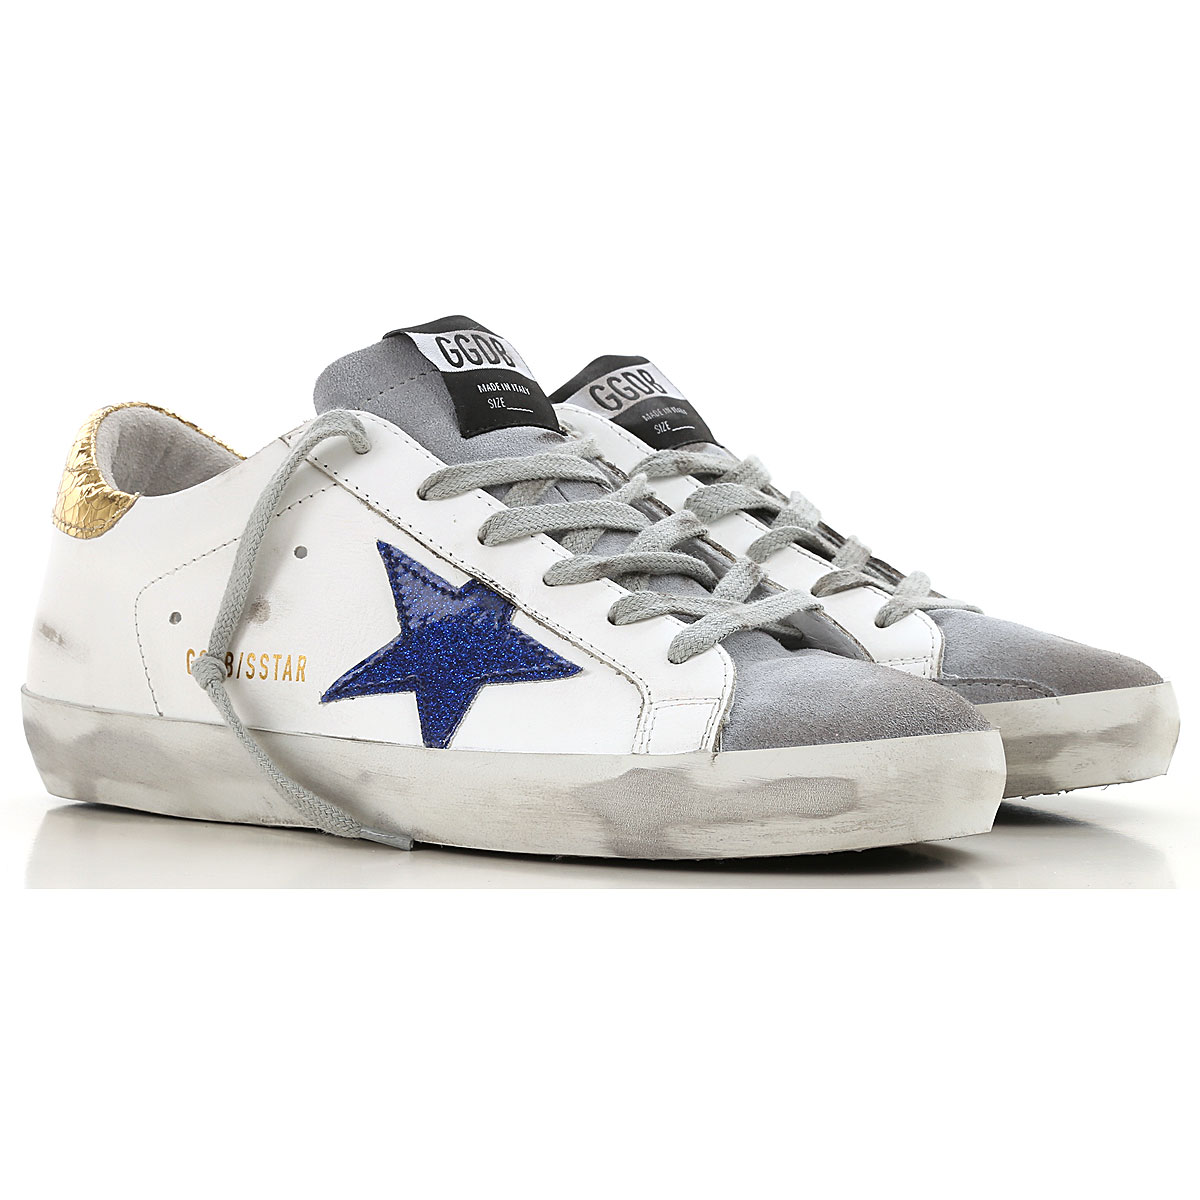 Womens Shoes Golden Goose, Style code g34ws590m64